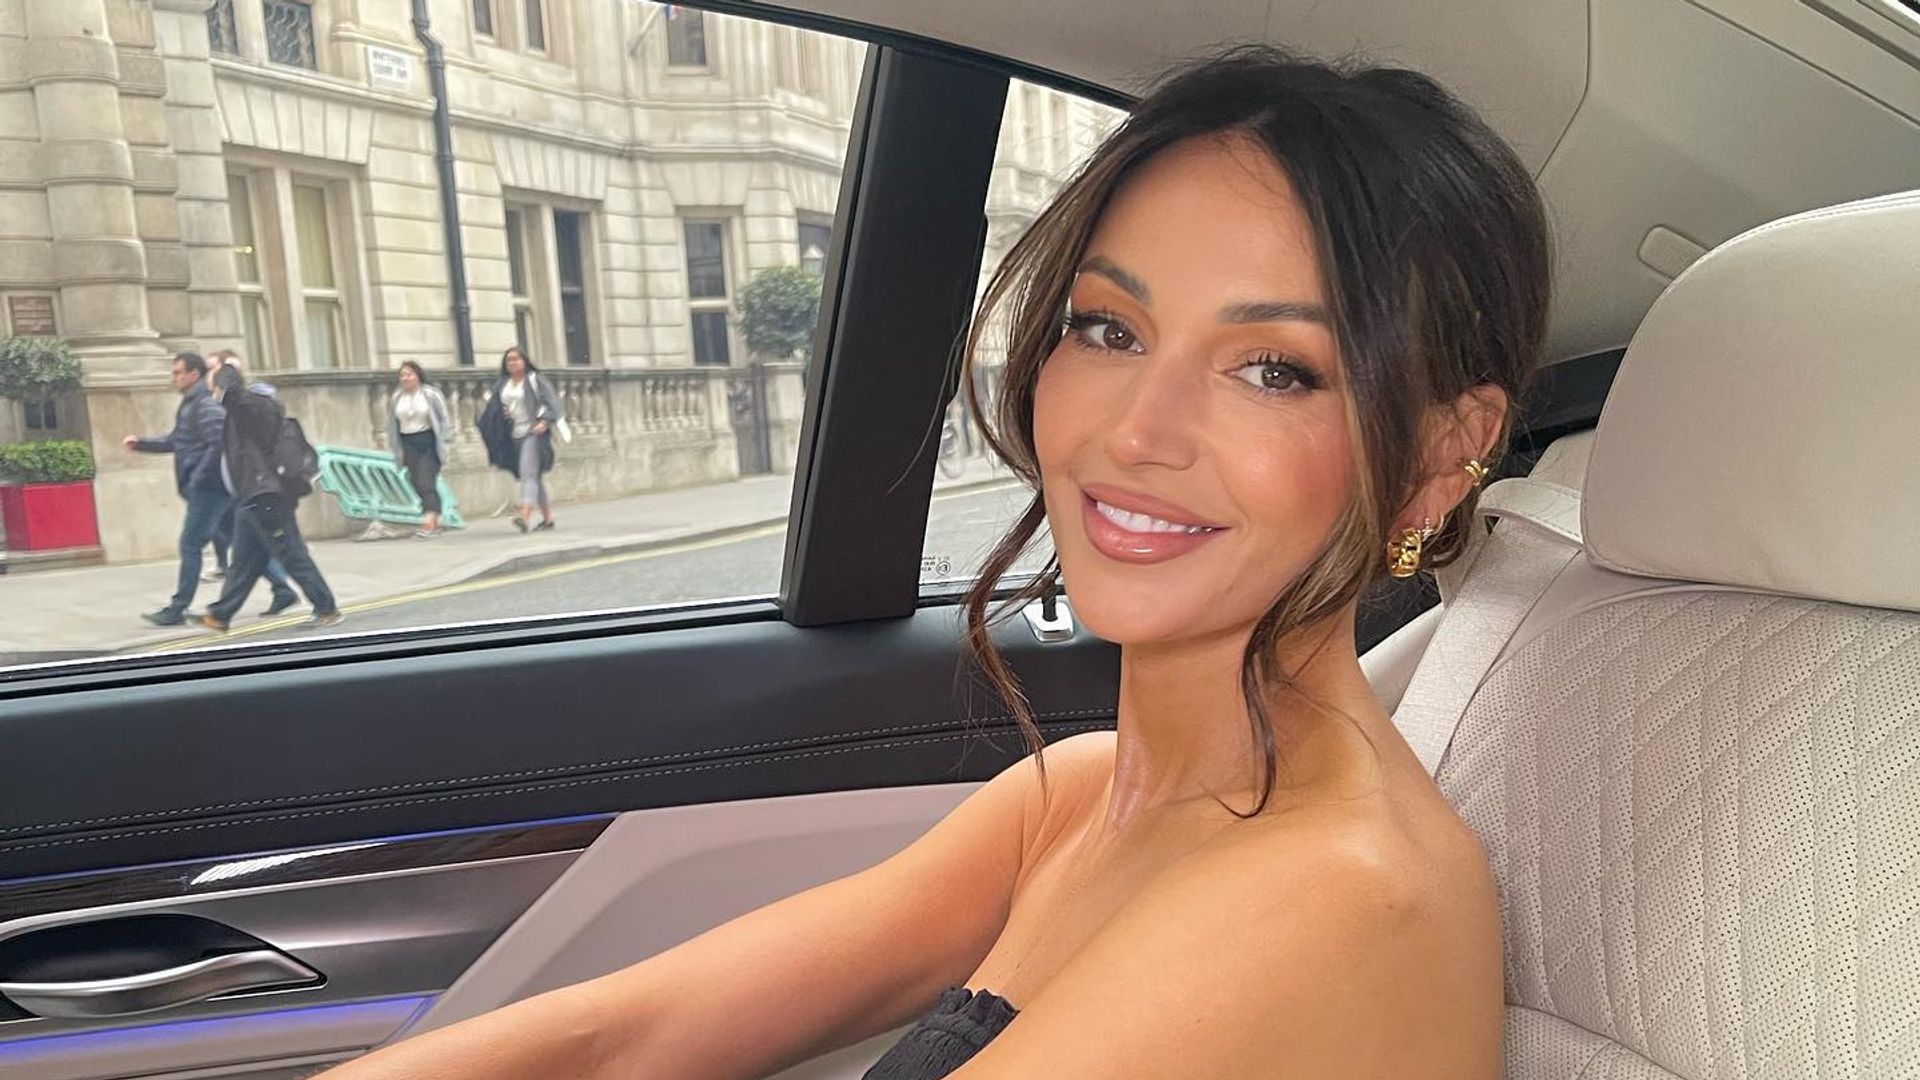 Is this proof that Michelle Keegan is set to be cast as Bond girl?